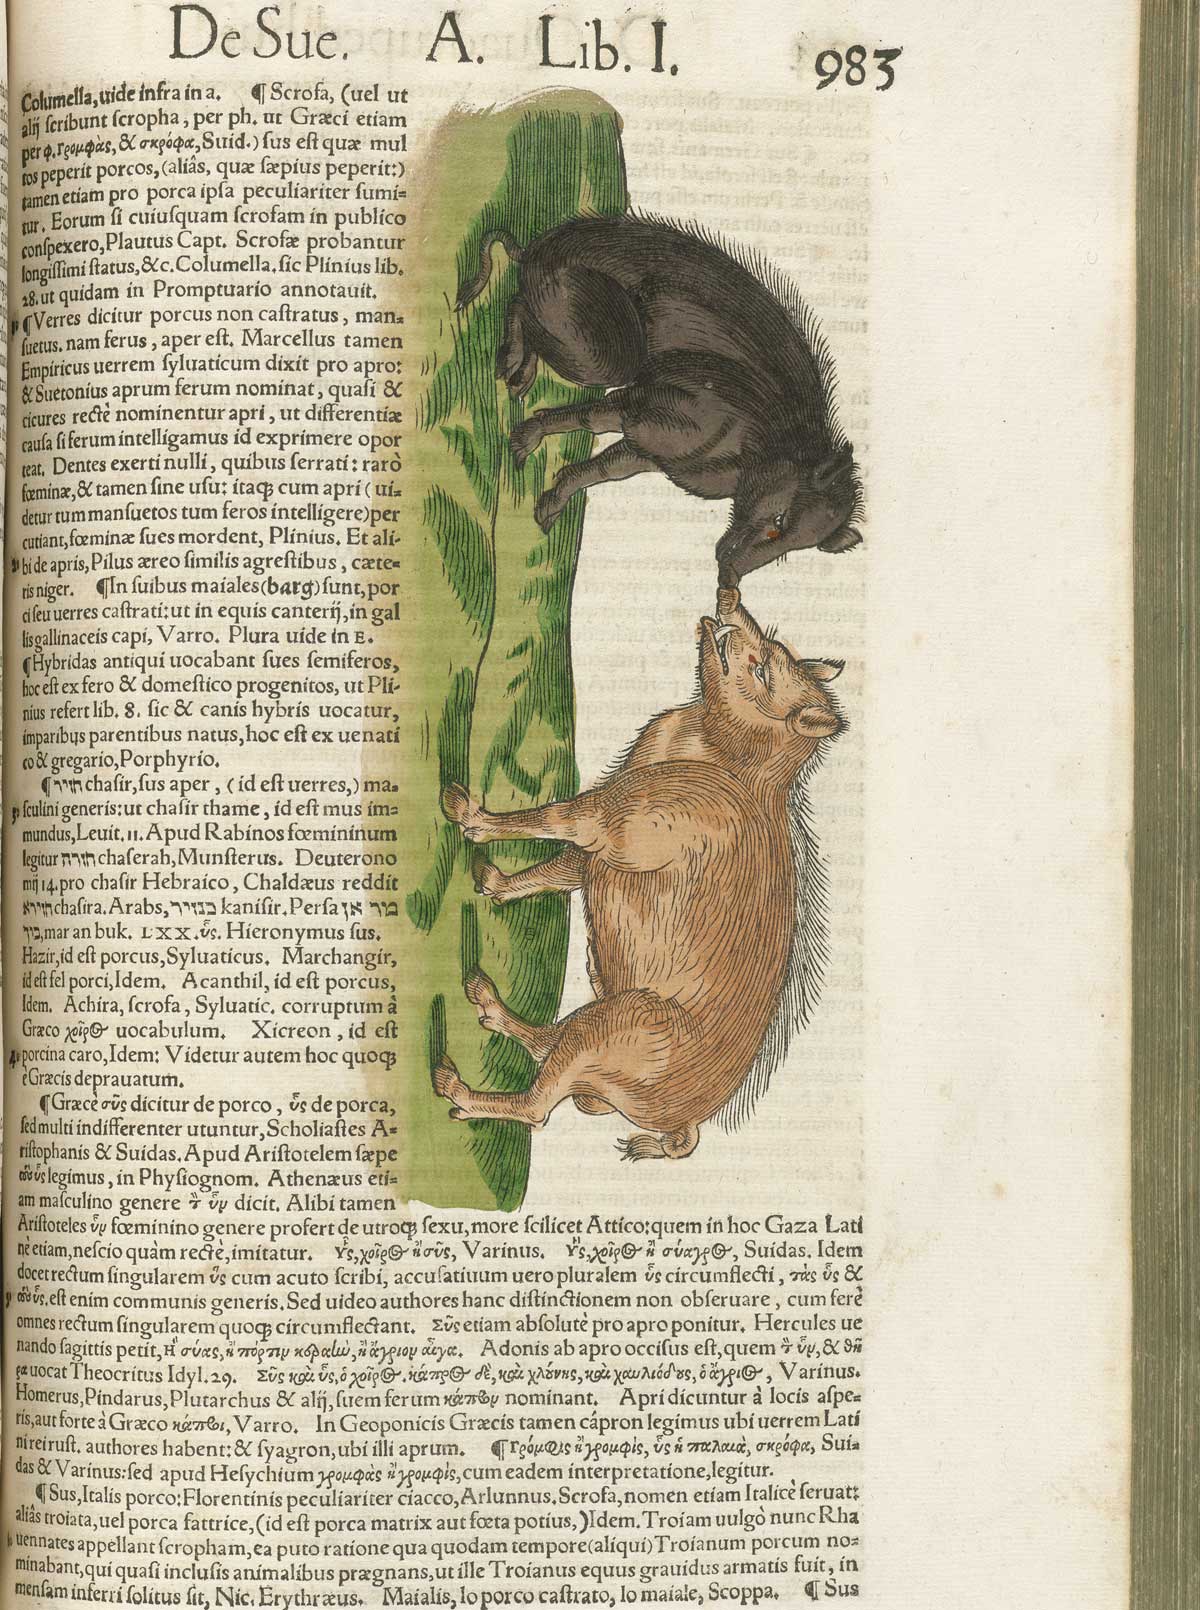 Page 983 from volume 1 of Conrad Gessner's Conradi Gesneri medici Tigurini Historiae animalium, featuring the colored woodcut of a black pig on the left and brown pig on the right.